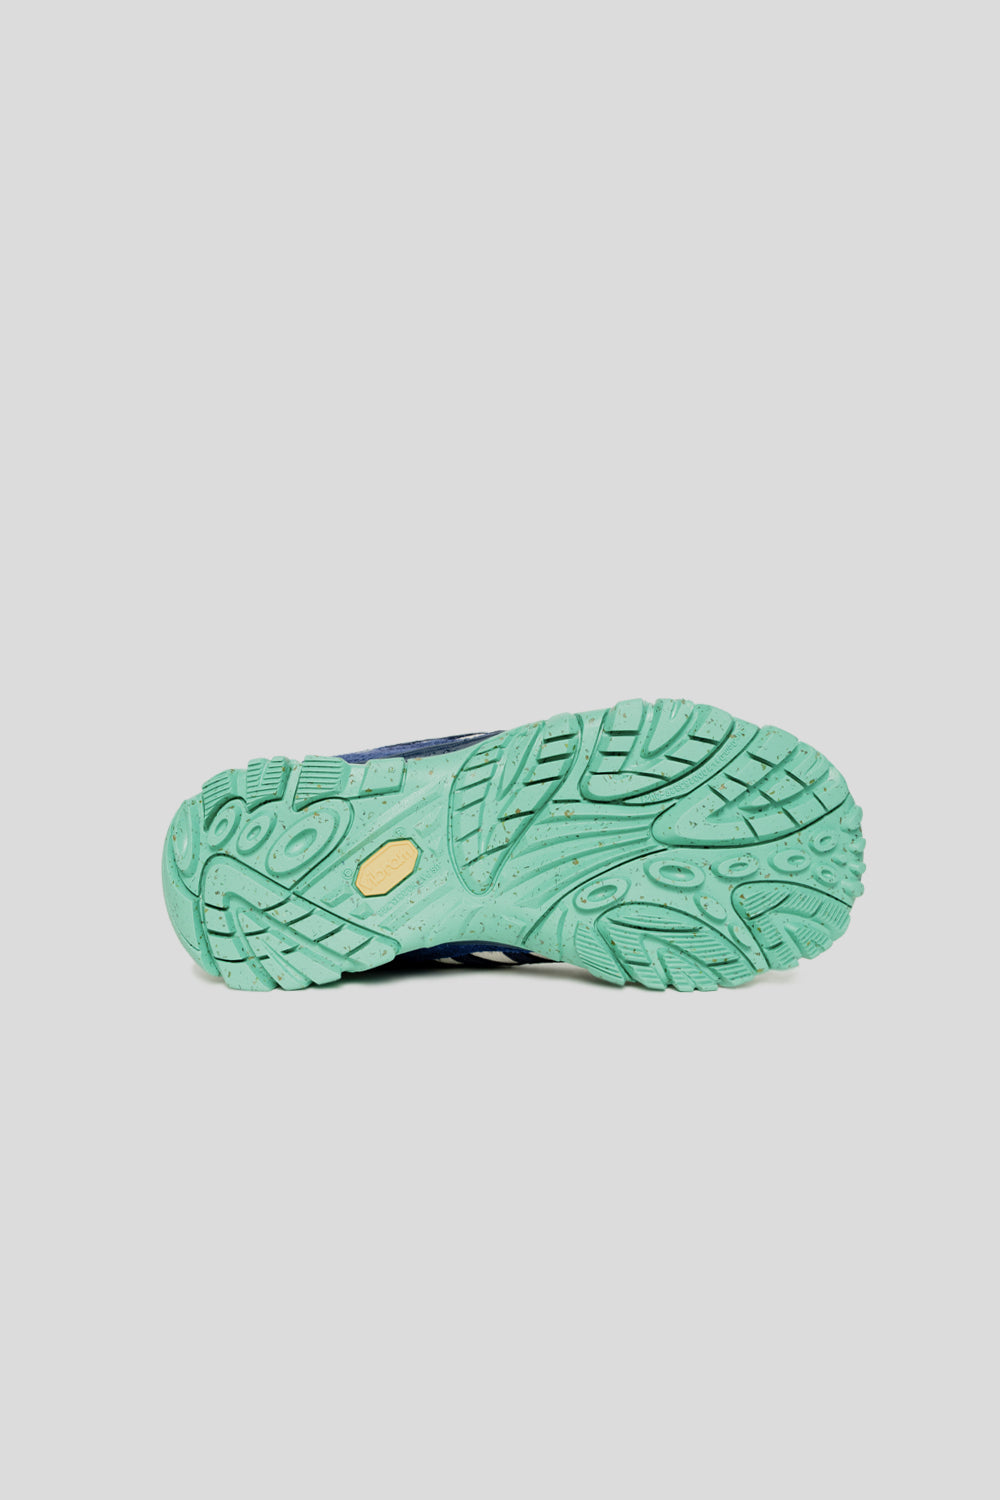 Merrell 1TRL x Reese Cooper Moab Mesa Luxe in Sea Oyster